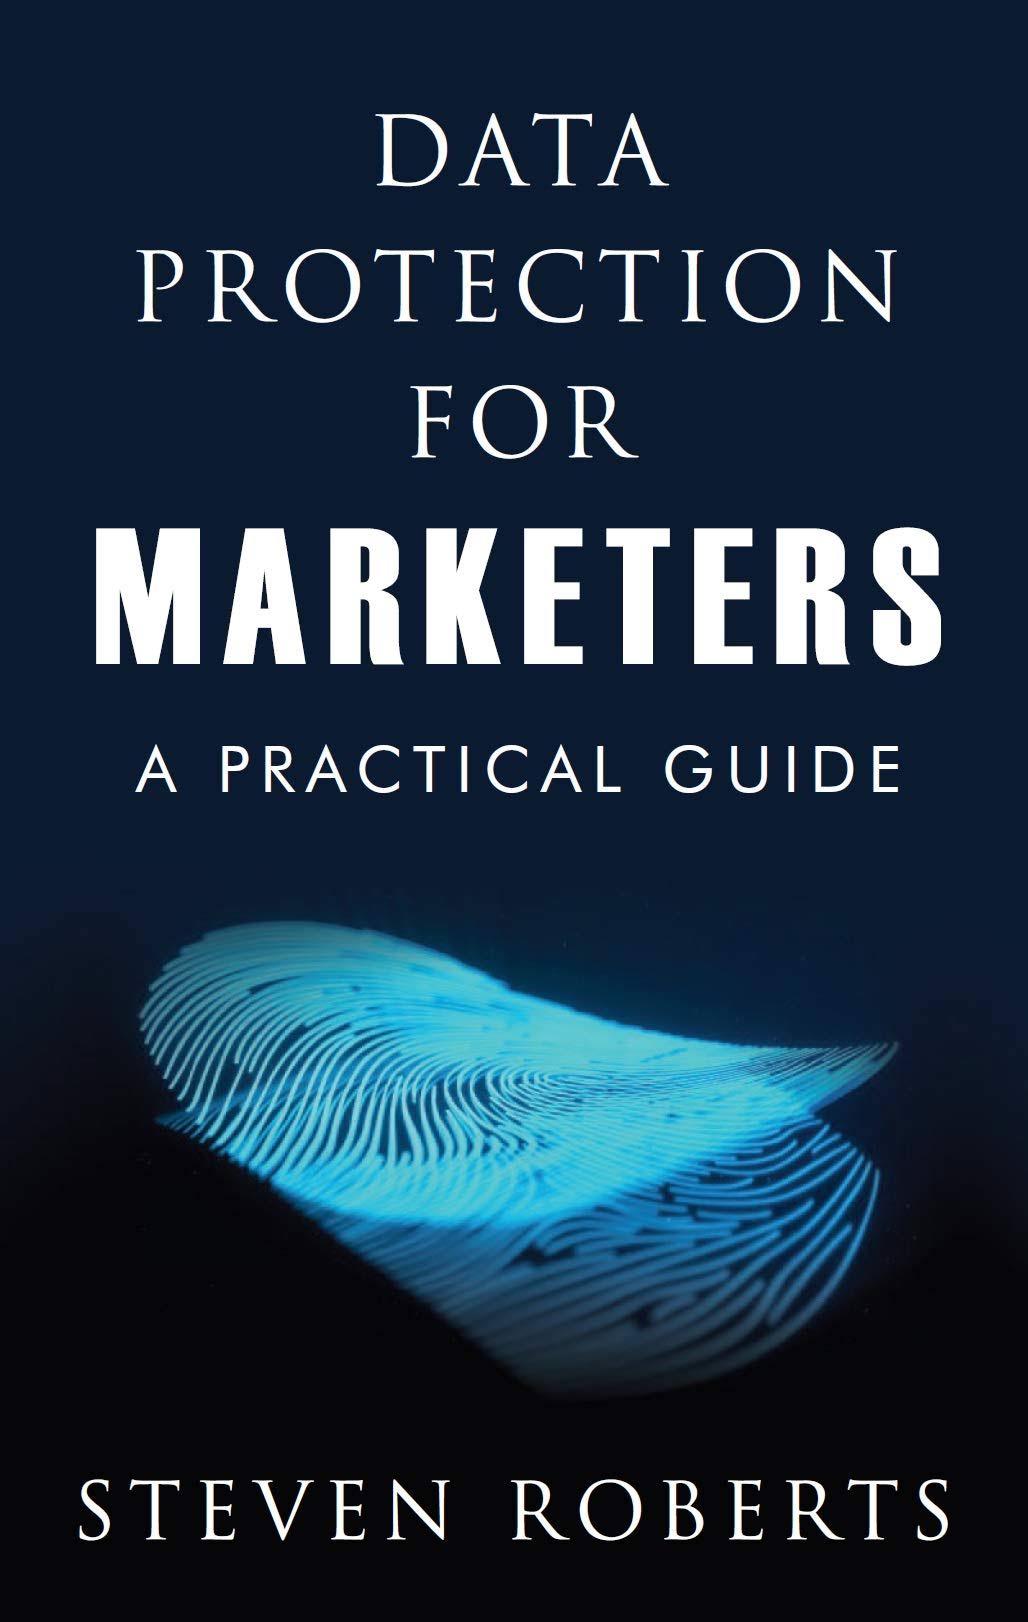 Data Protection for Marketers by Steven Roberts